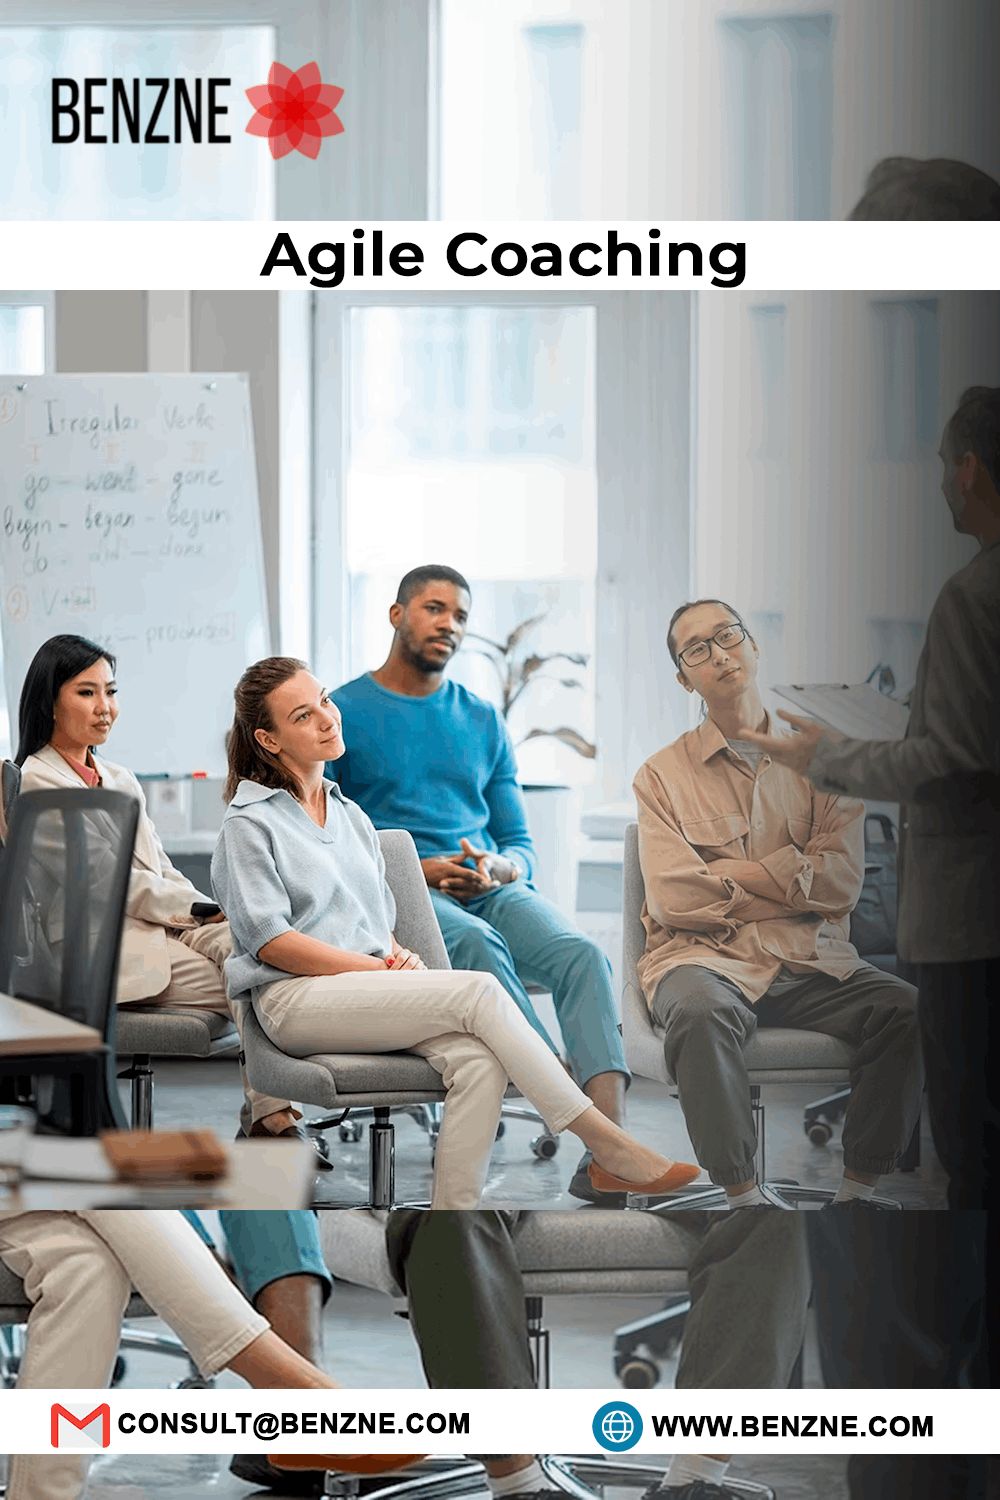 Agile Coaching With Benzne: A Better Resource To Know More About Agile Strategy